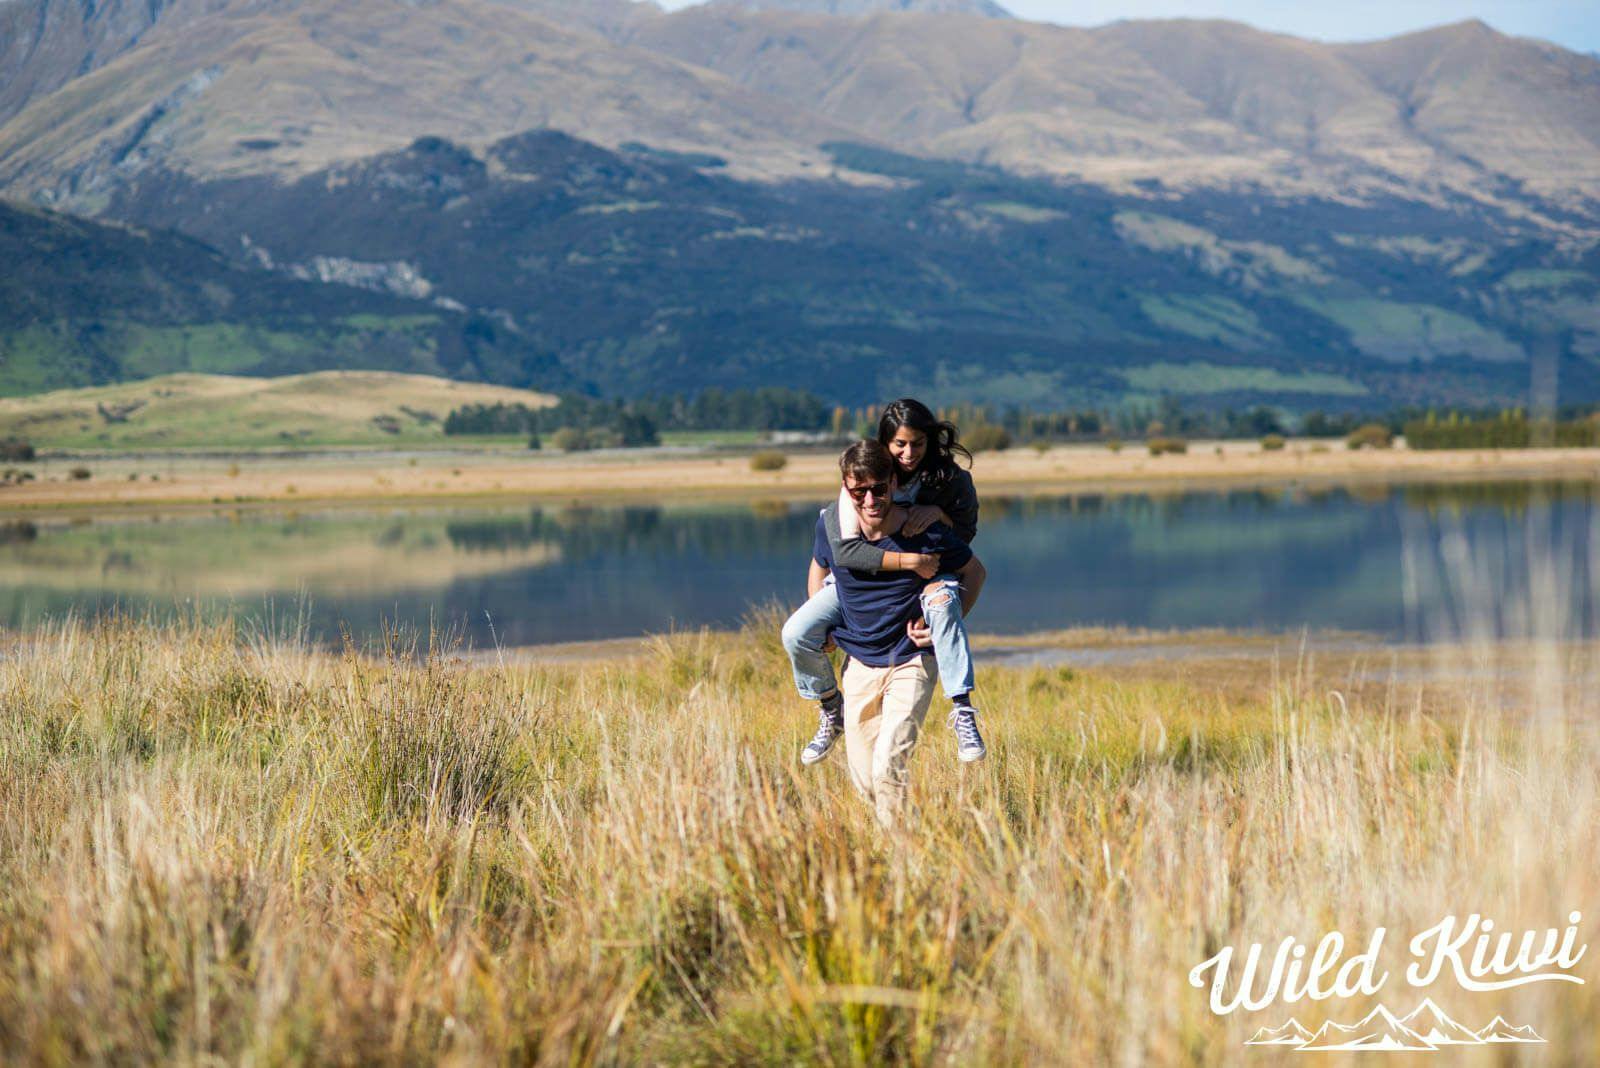 Hiking New Zealand - See natural wonders from a new perspective